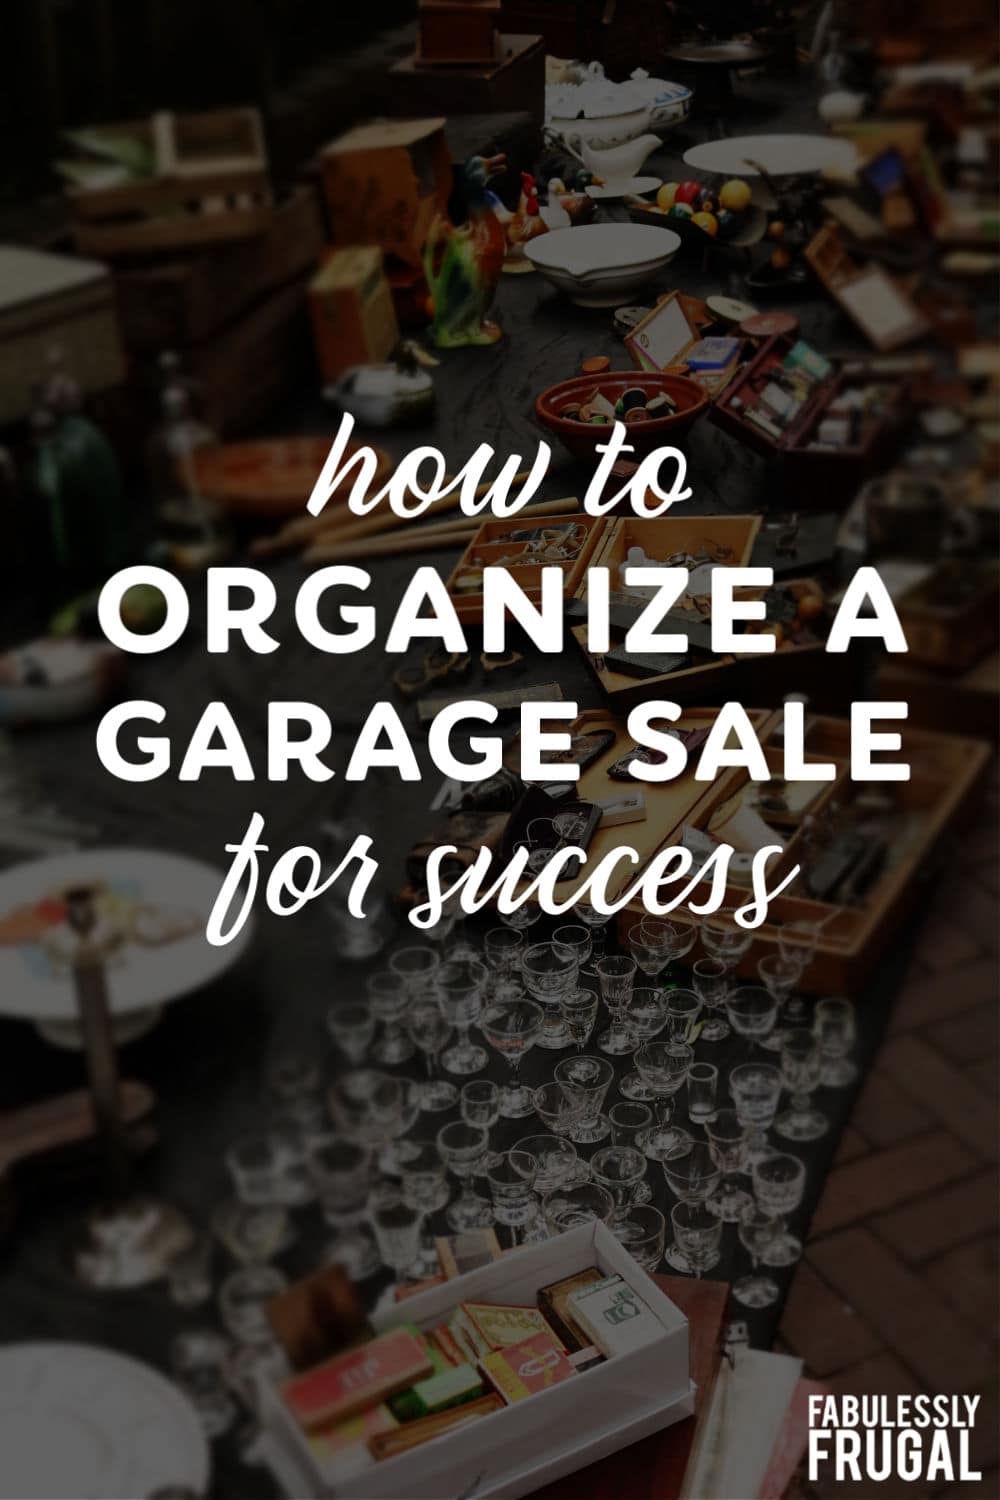 How to organize a garage sale for success